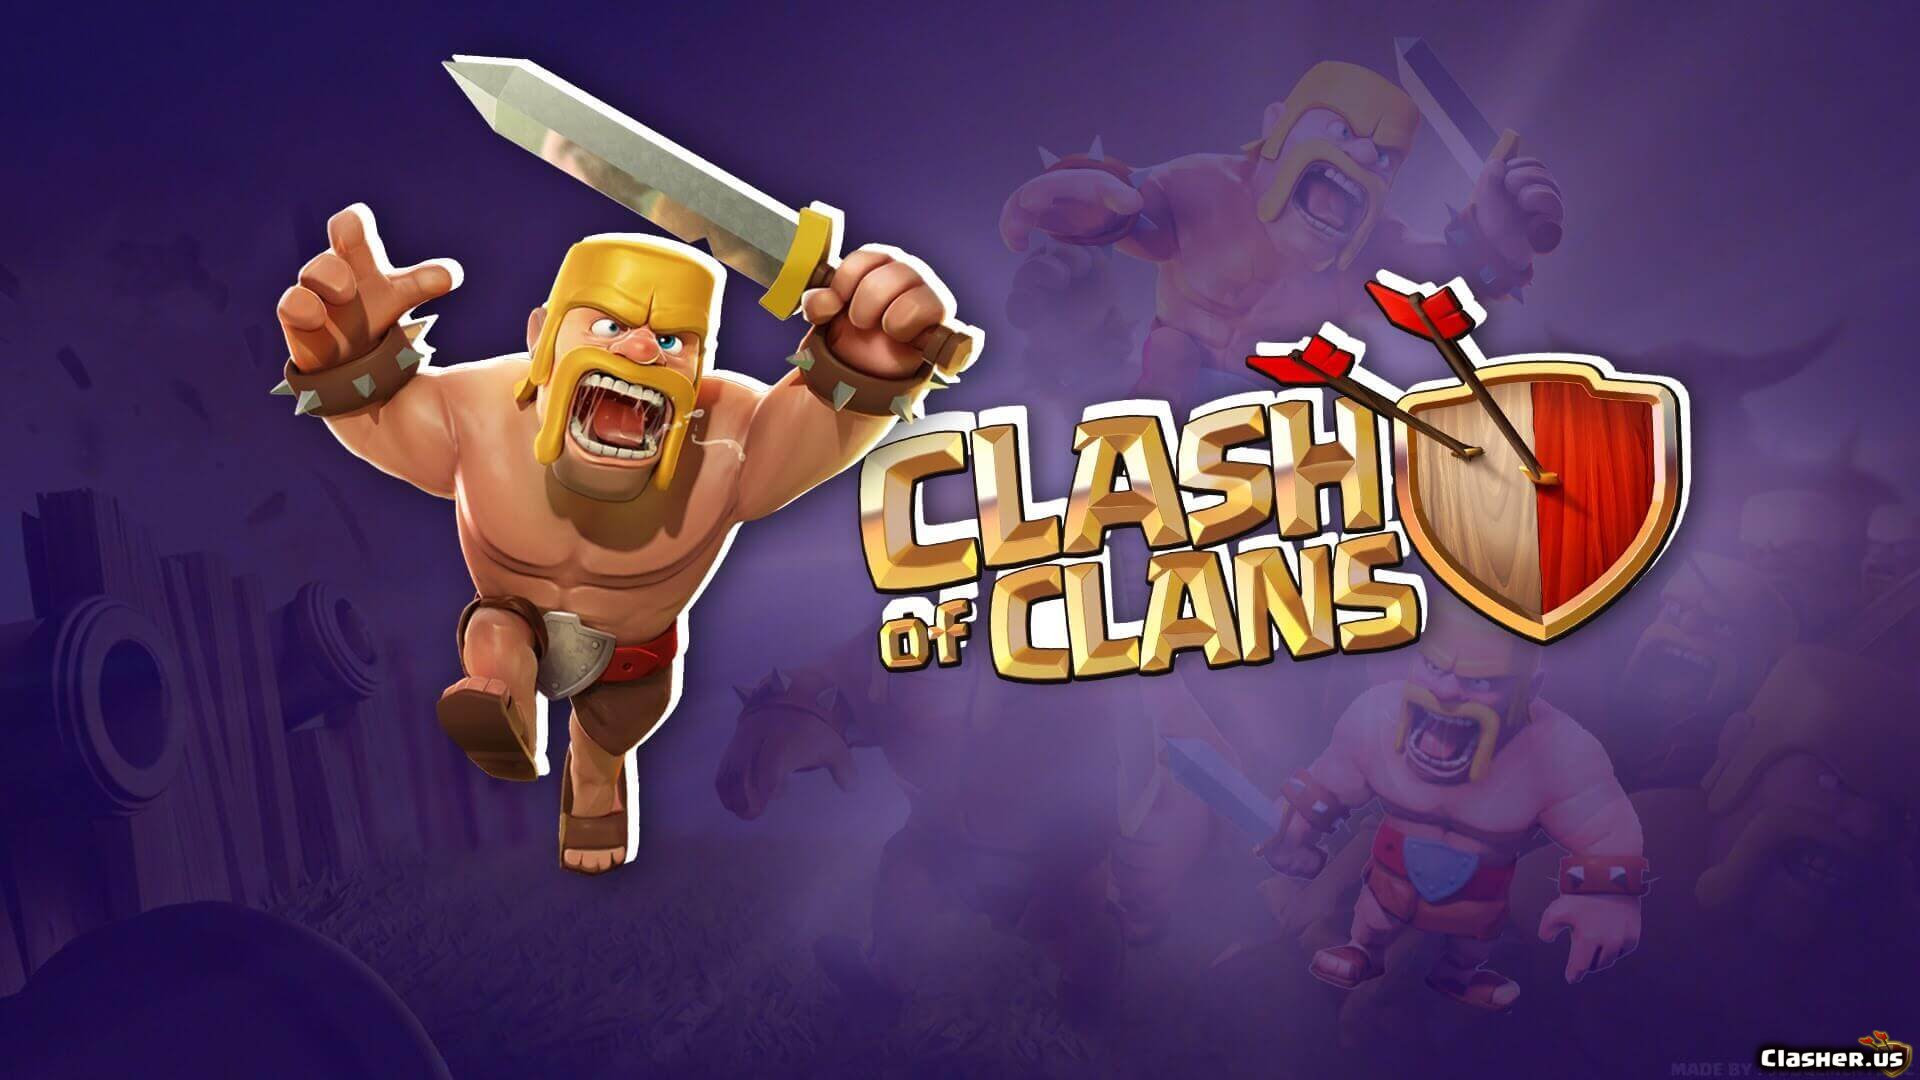 Powerful clash of clans logo with a war-based design on Craiyon